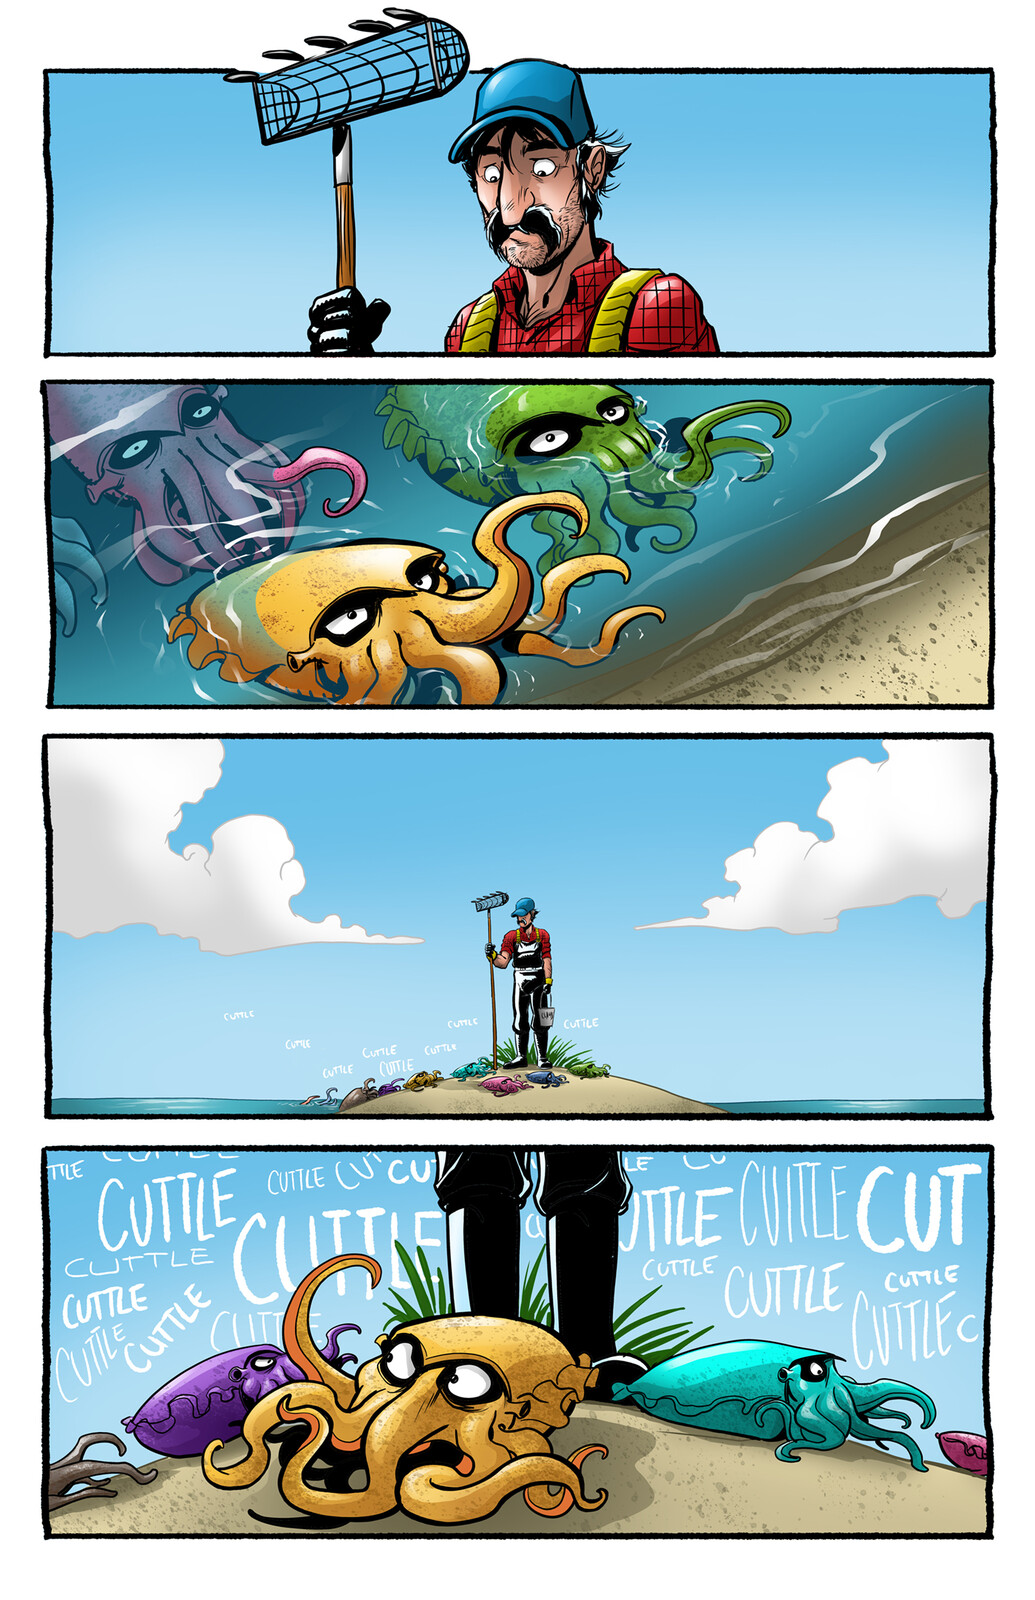 UNDERSEA HERO comic strip page five.

UNDERSEA HERO and all Related Characters are Copyright © and Trademark TM 2022 Ian Chase Nichols. All Rights Reserved.
